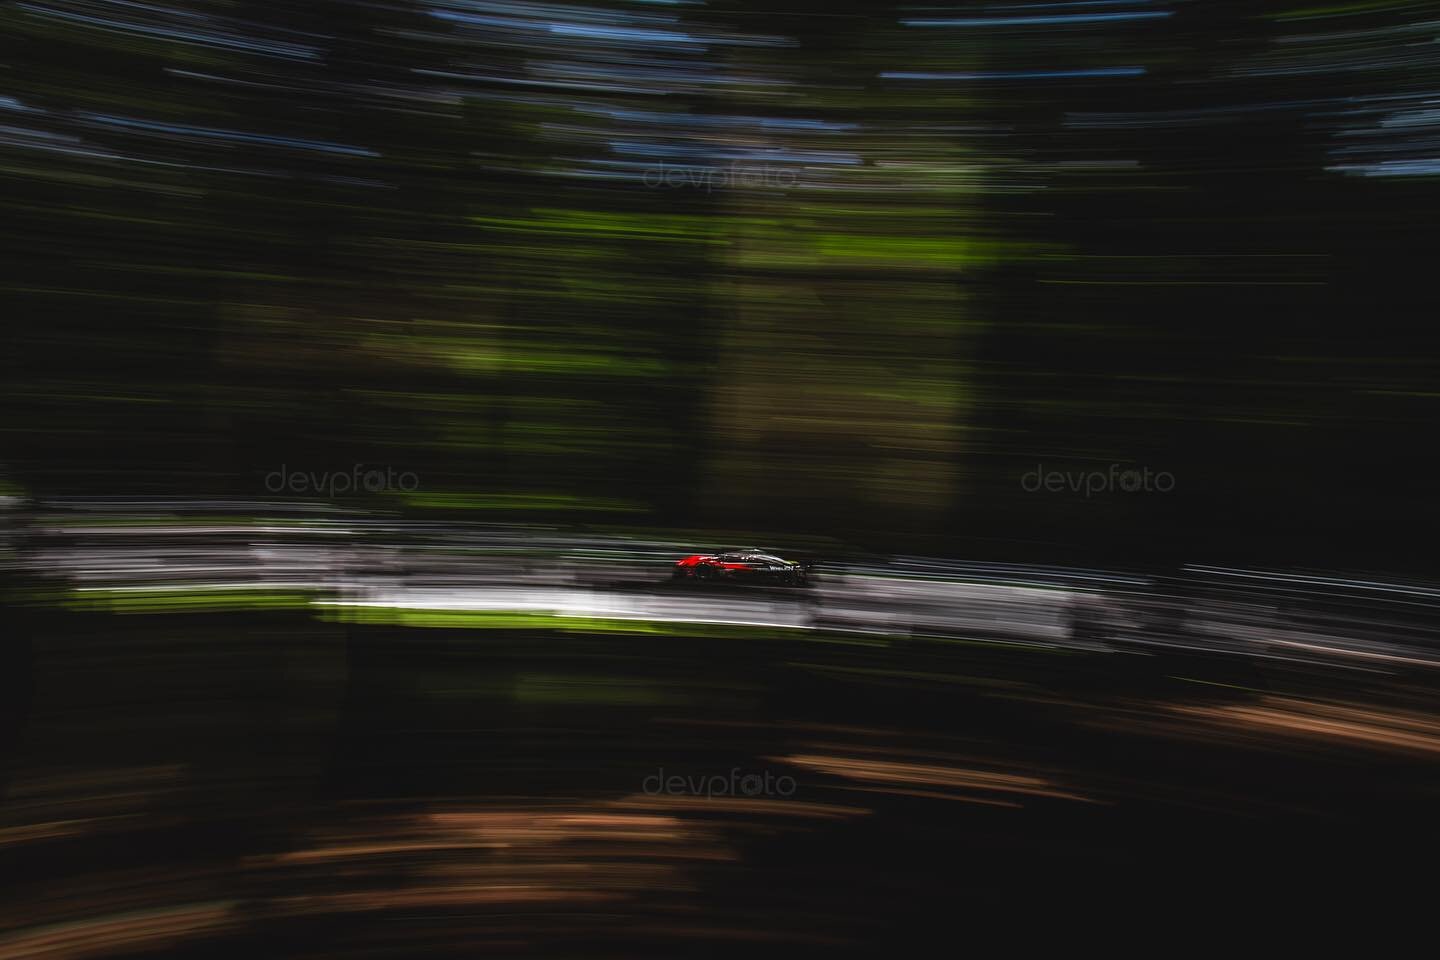 check out this super cool pic I snapped from a hike through some canadian woods🍁

#imsa #motorsport #racecar #racing #ctmp #mosport #gtp
#cadillac